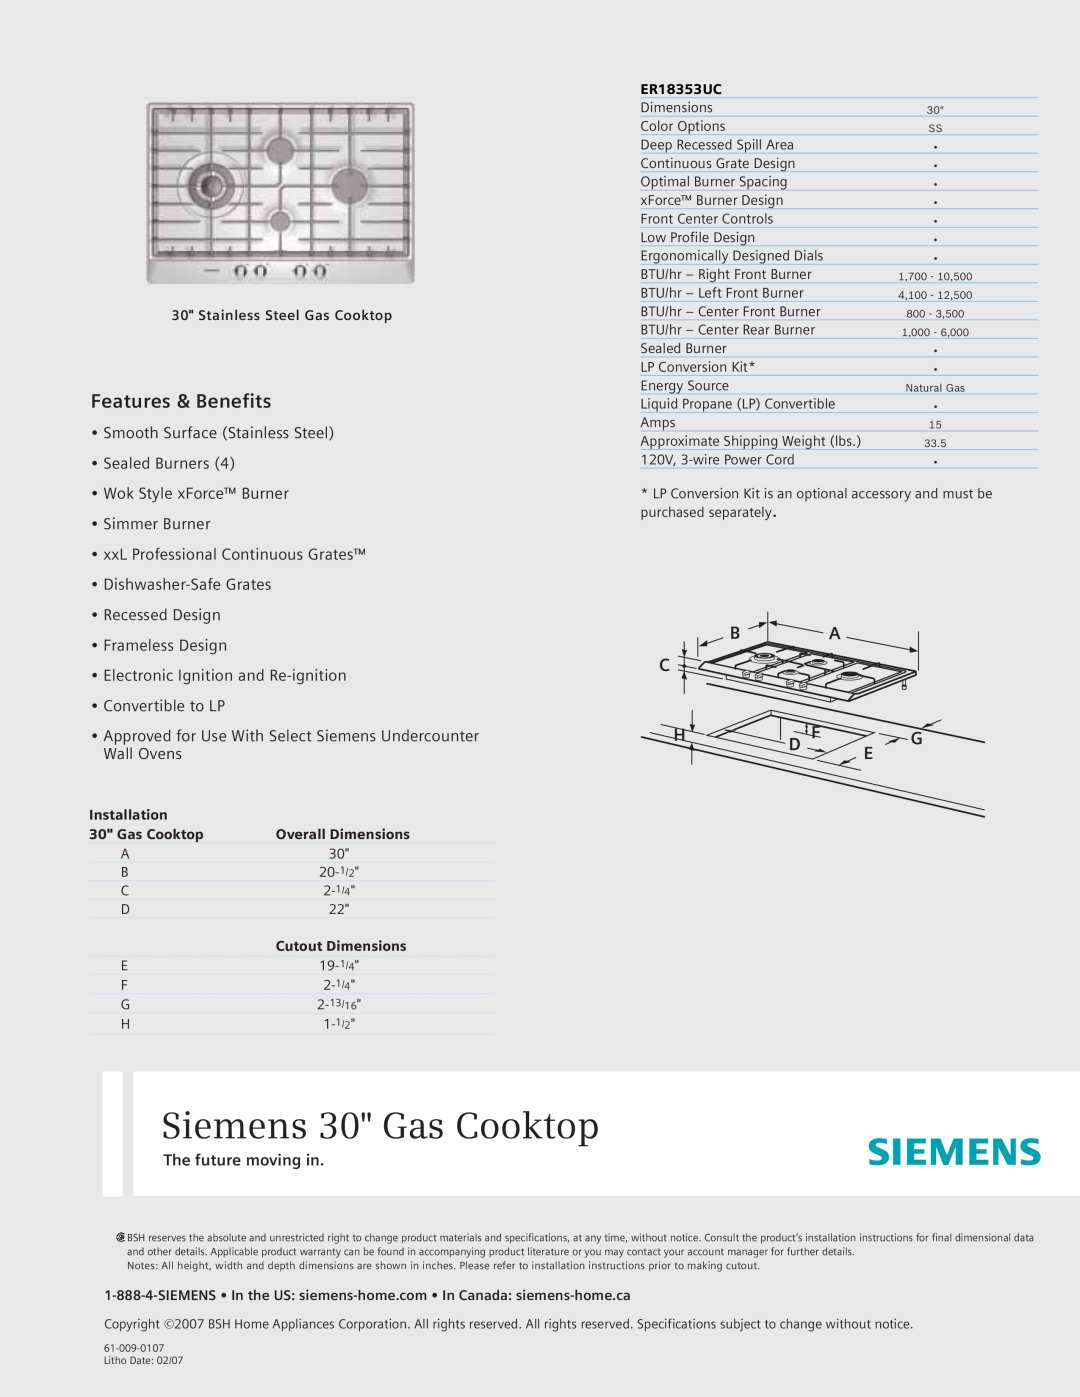 Siemens ER18353UC specifications Siemens 30 Gas Cooktop, Features & Benefits, Ba C, The future moving in, Installation 